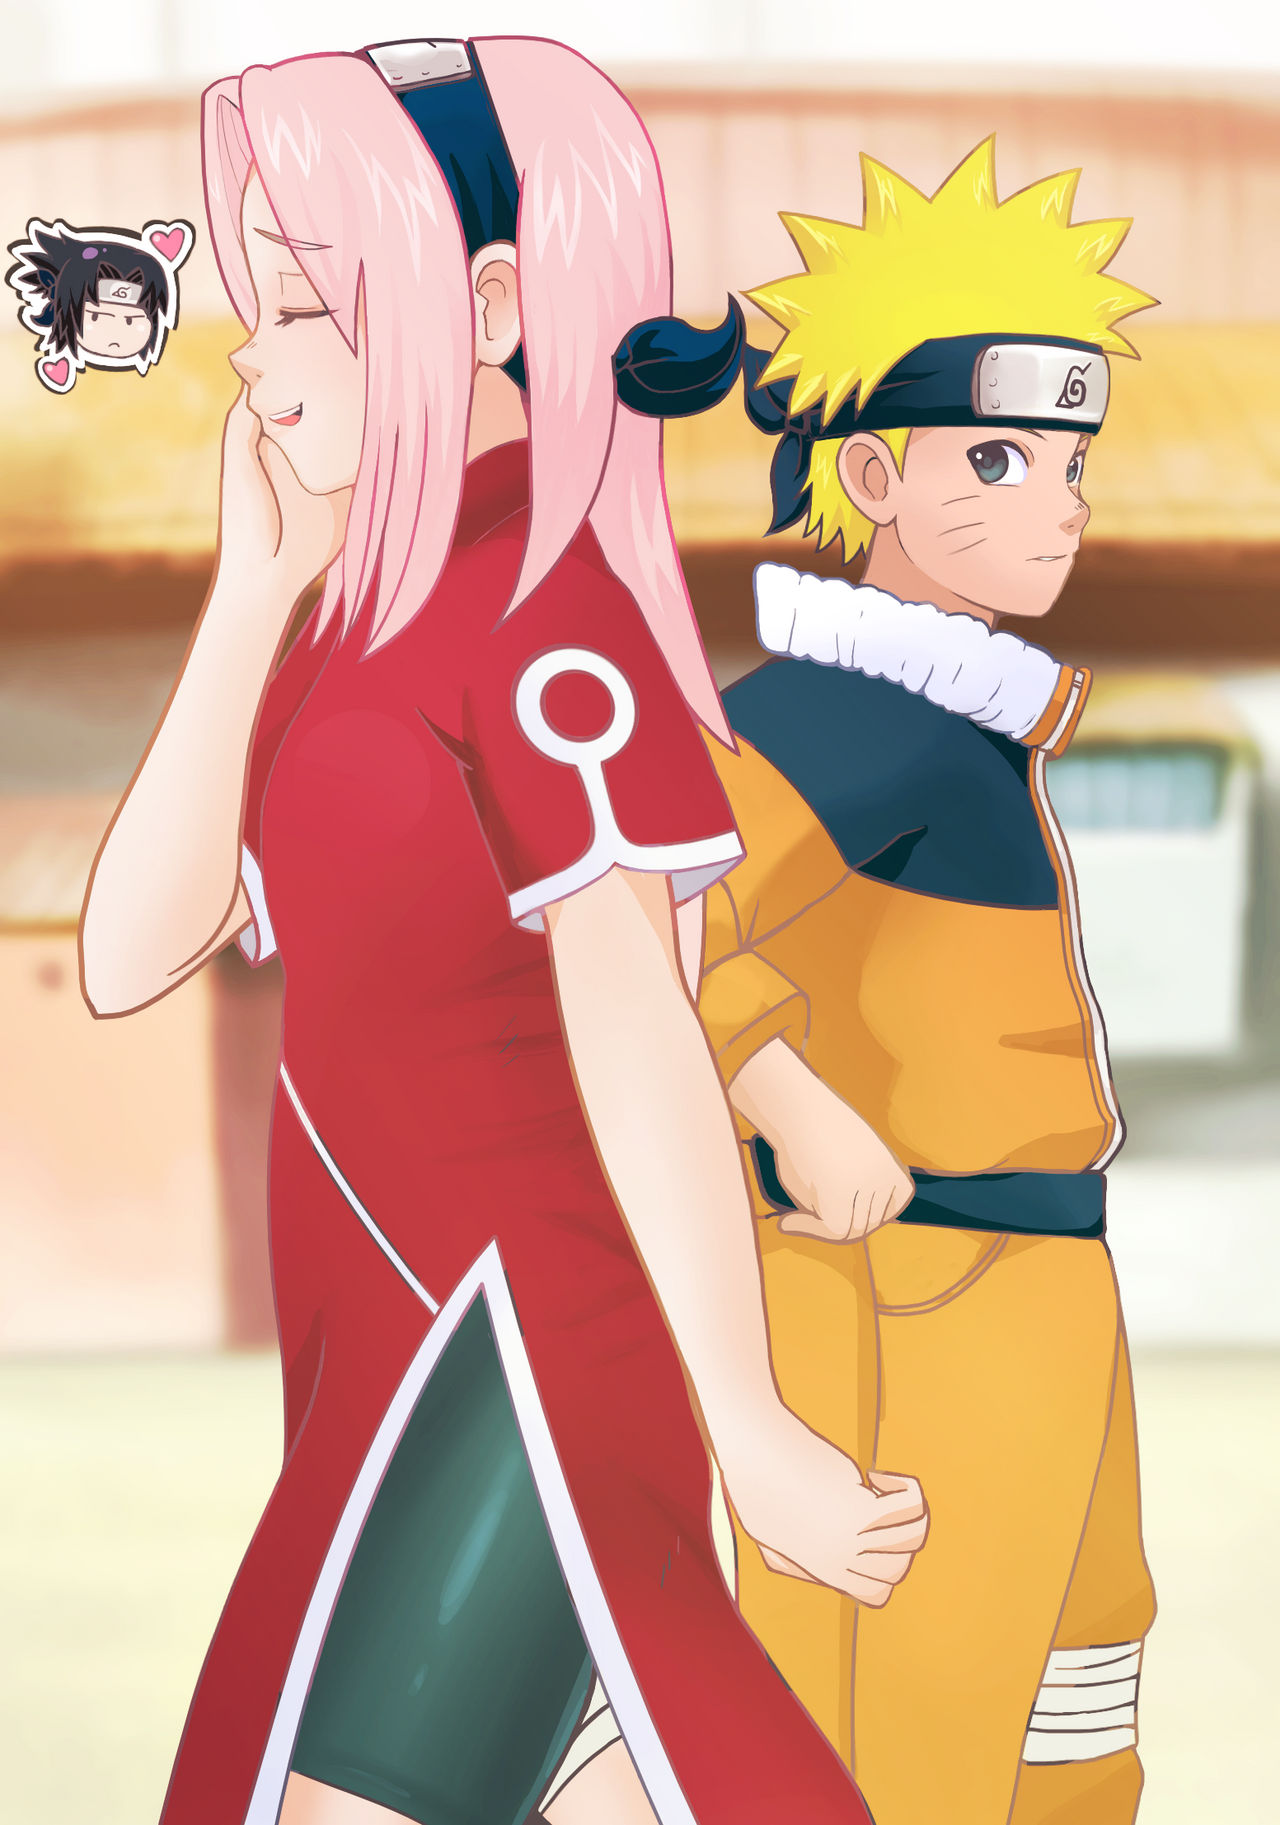 A Mission With The Hokage ( A Naruto Fanfic) - Let's Go On A Field